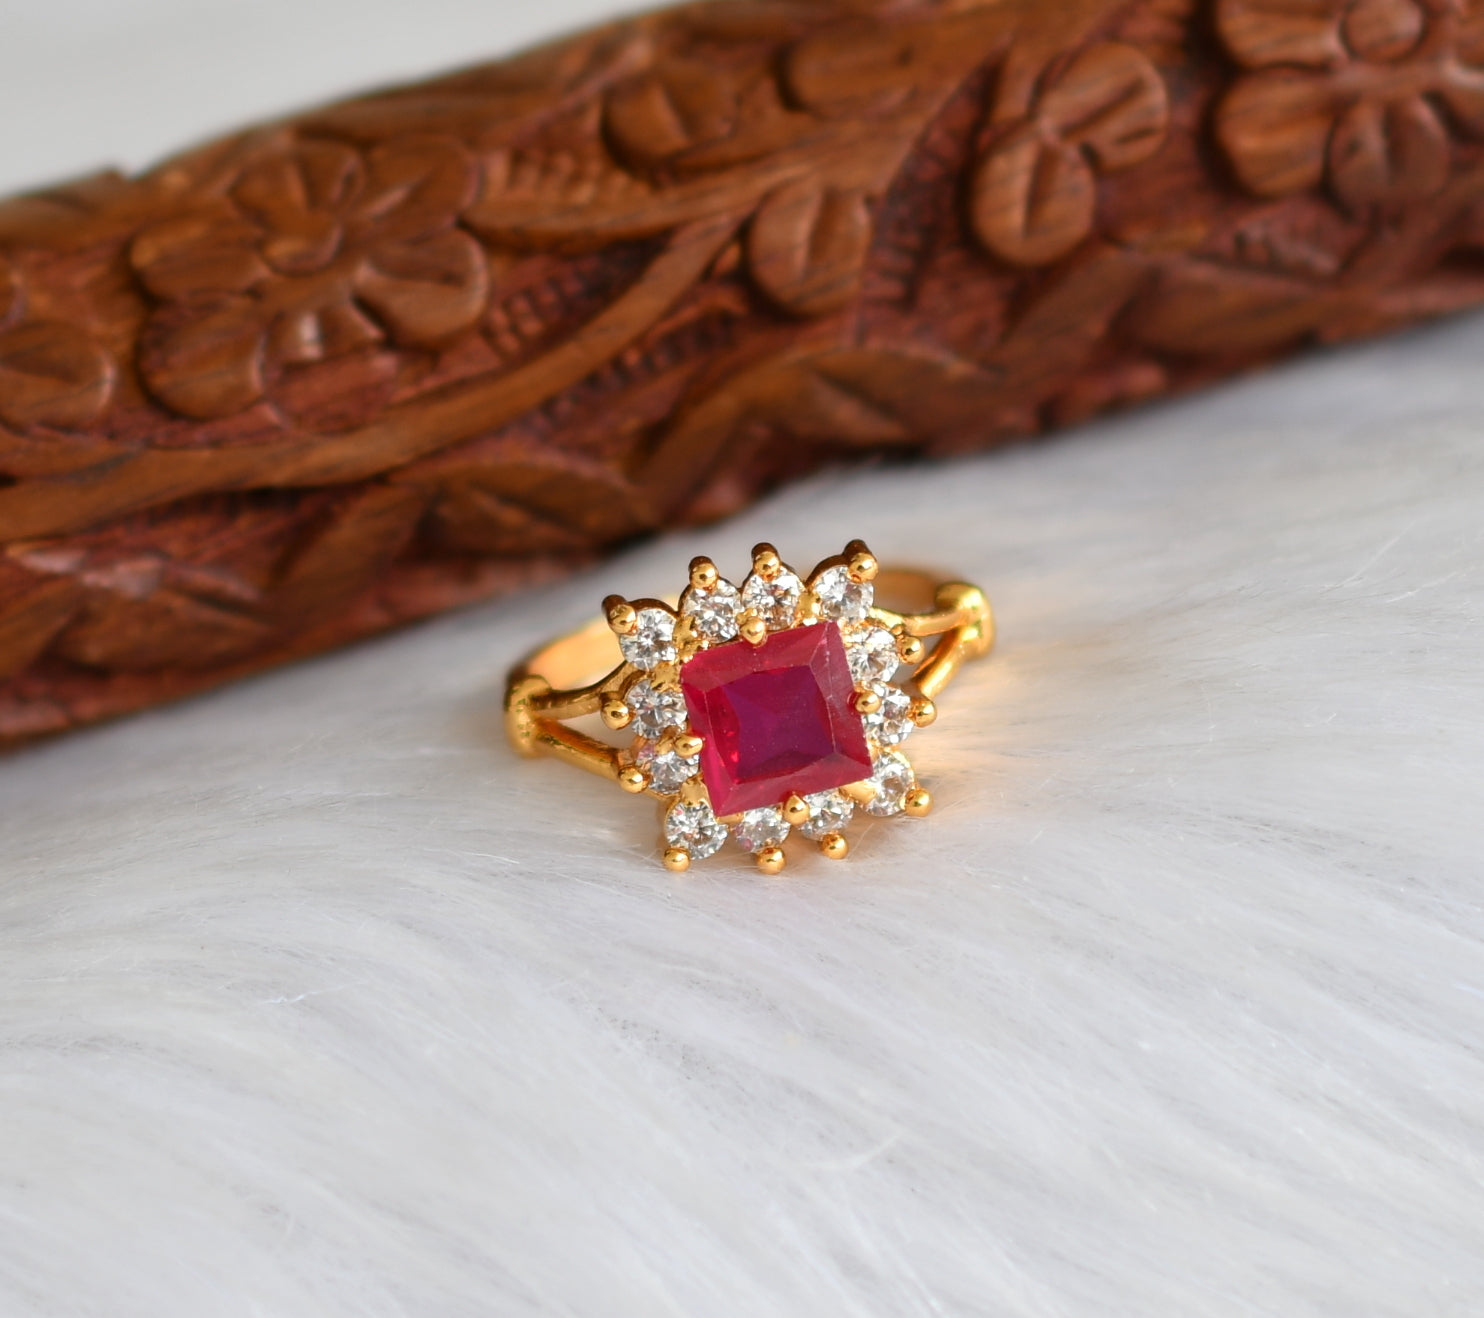 In which finger should I wear a Ruby gemstone and a Red Coral gemstone if I  wear both in my right hand? - Quora